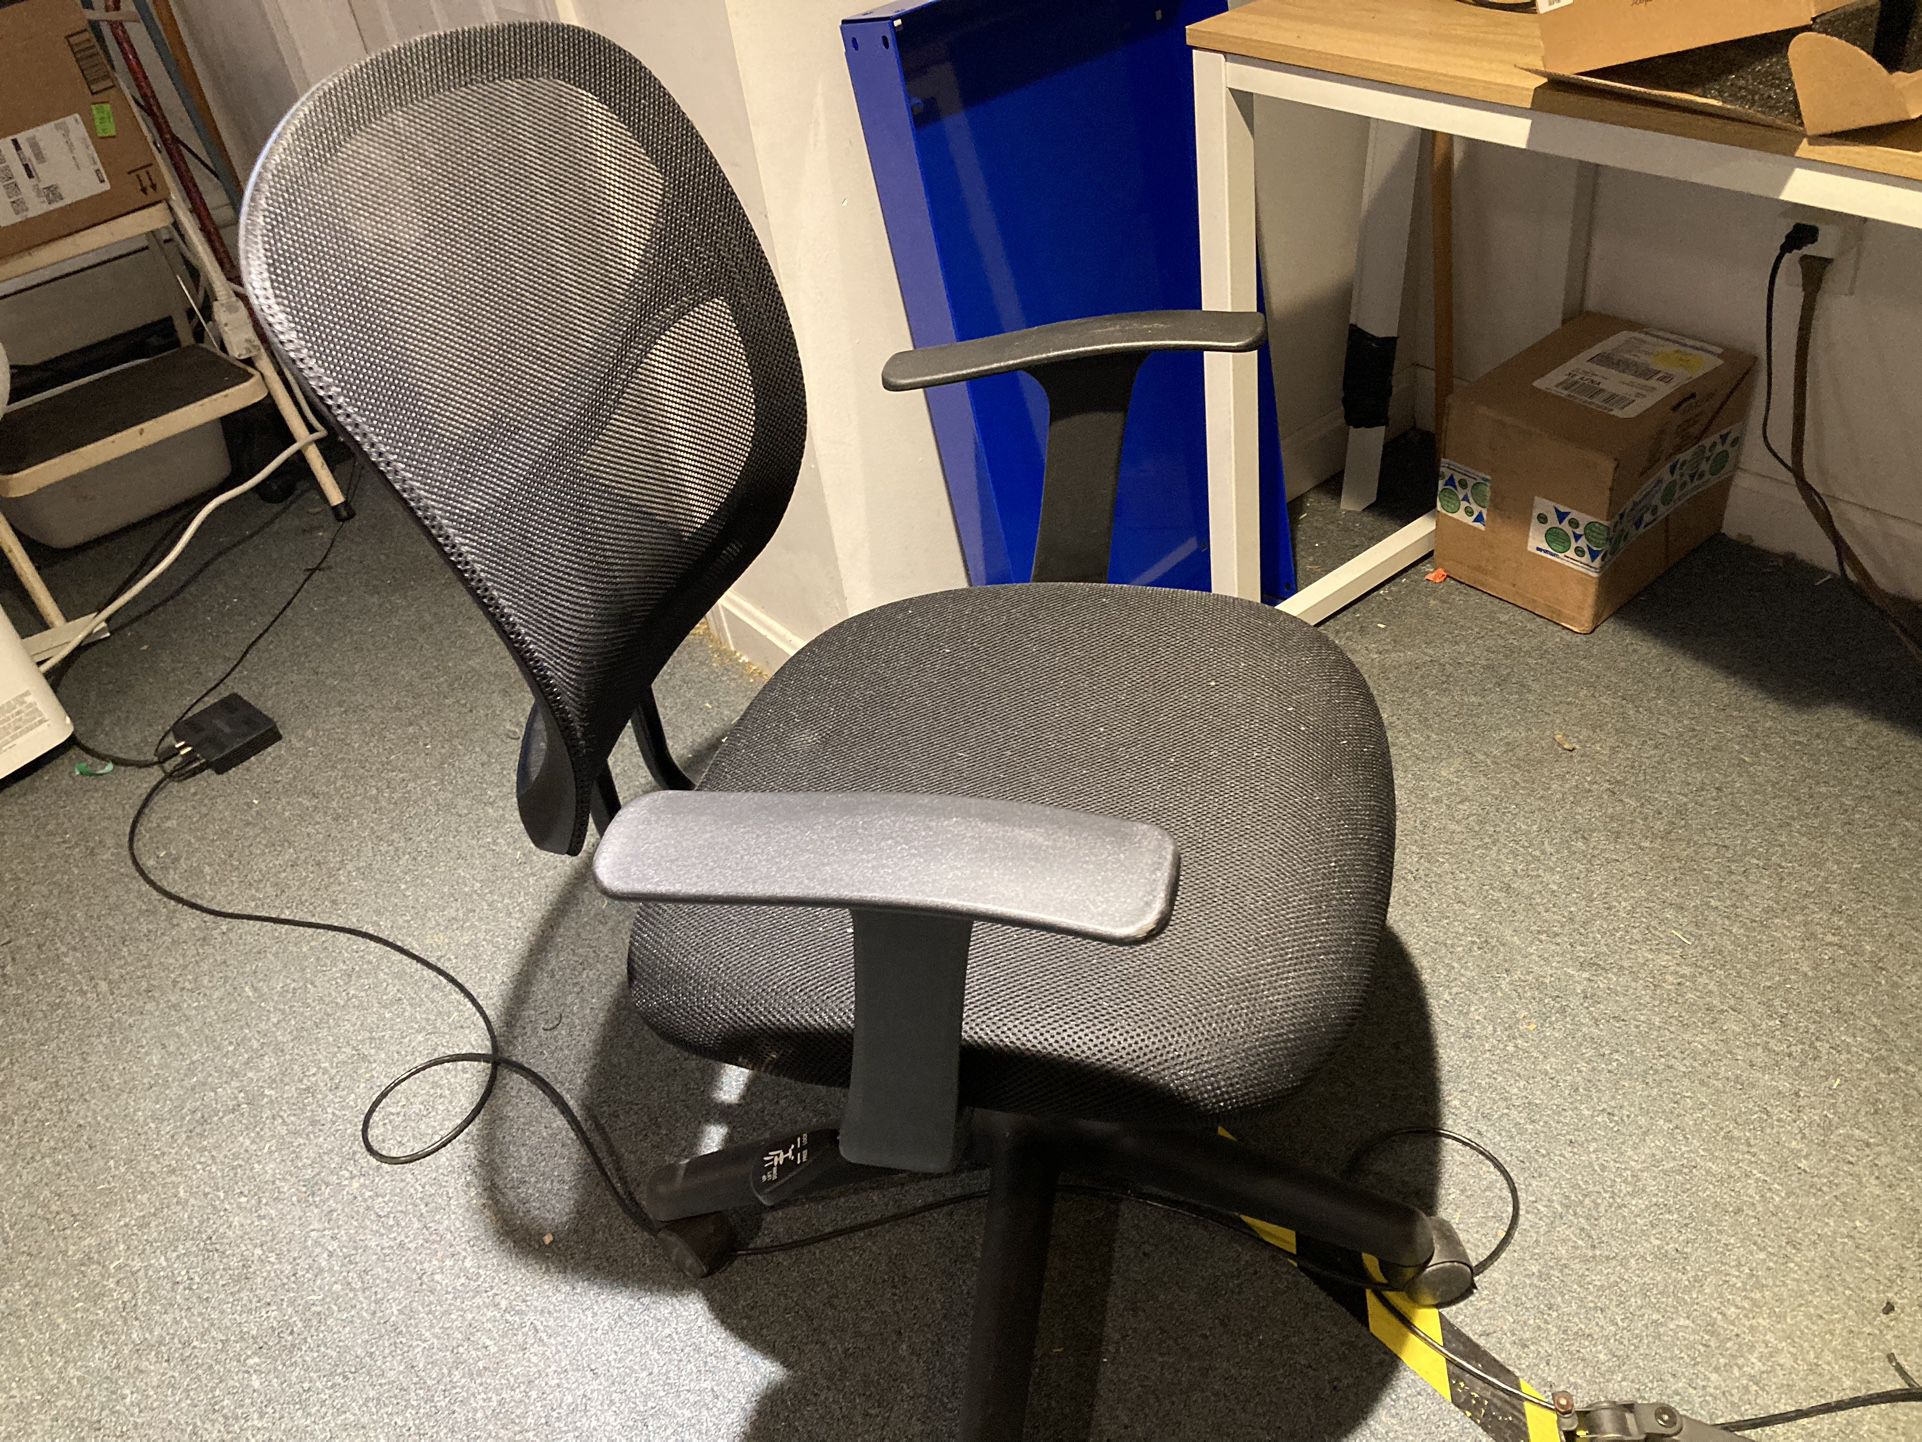 New Office Chair - Black